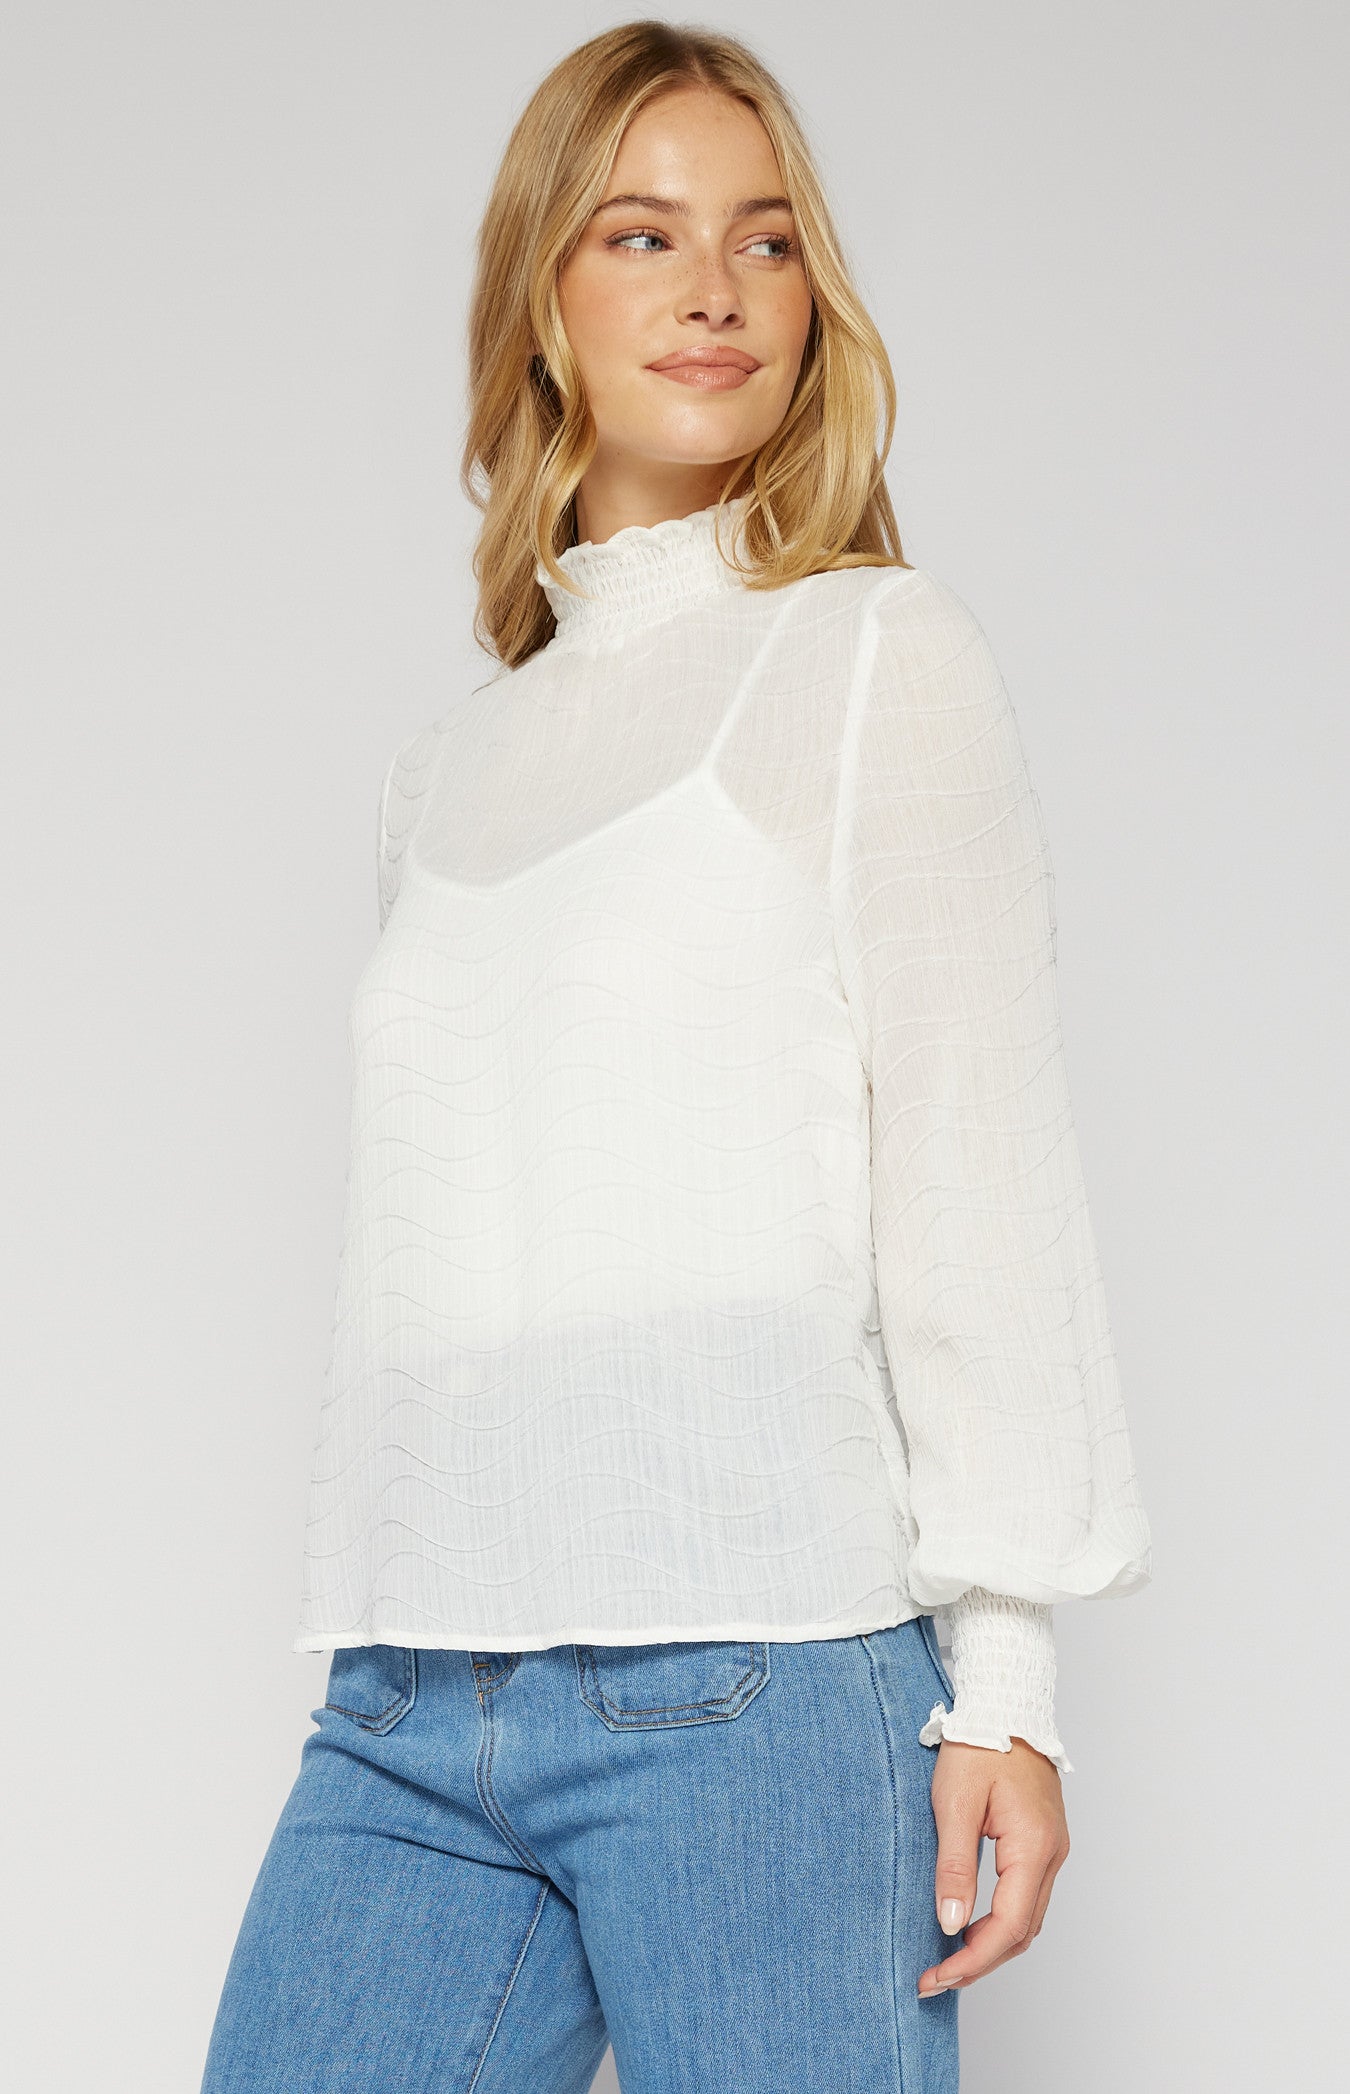 3D Textured Top With Lining - White